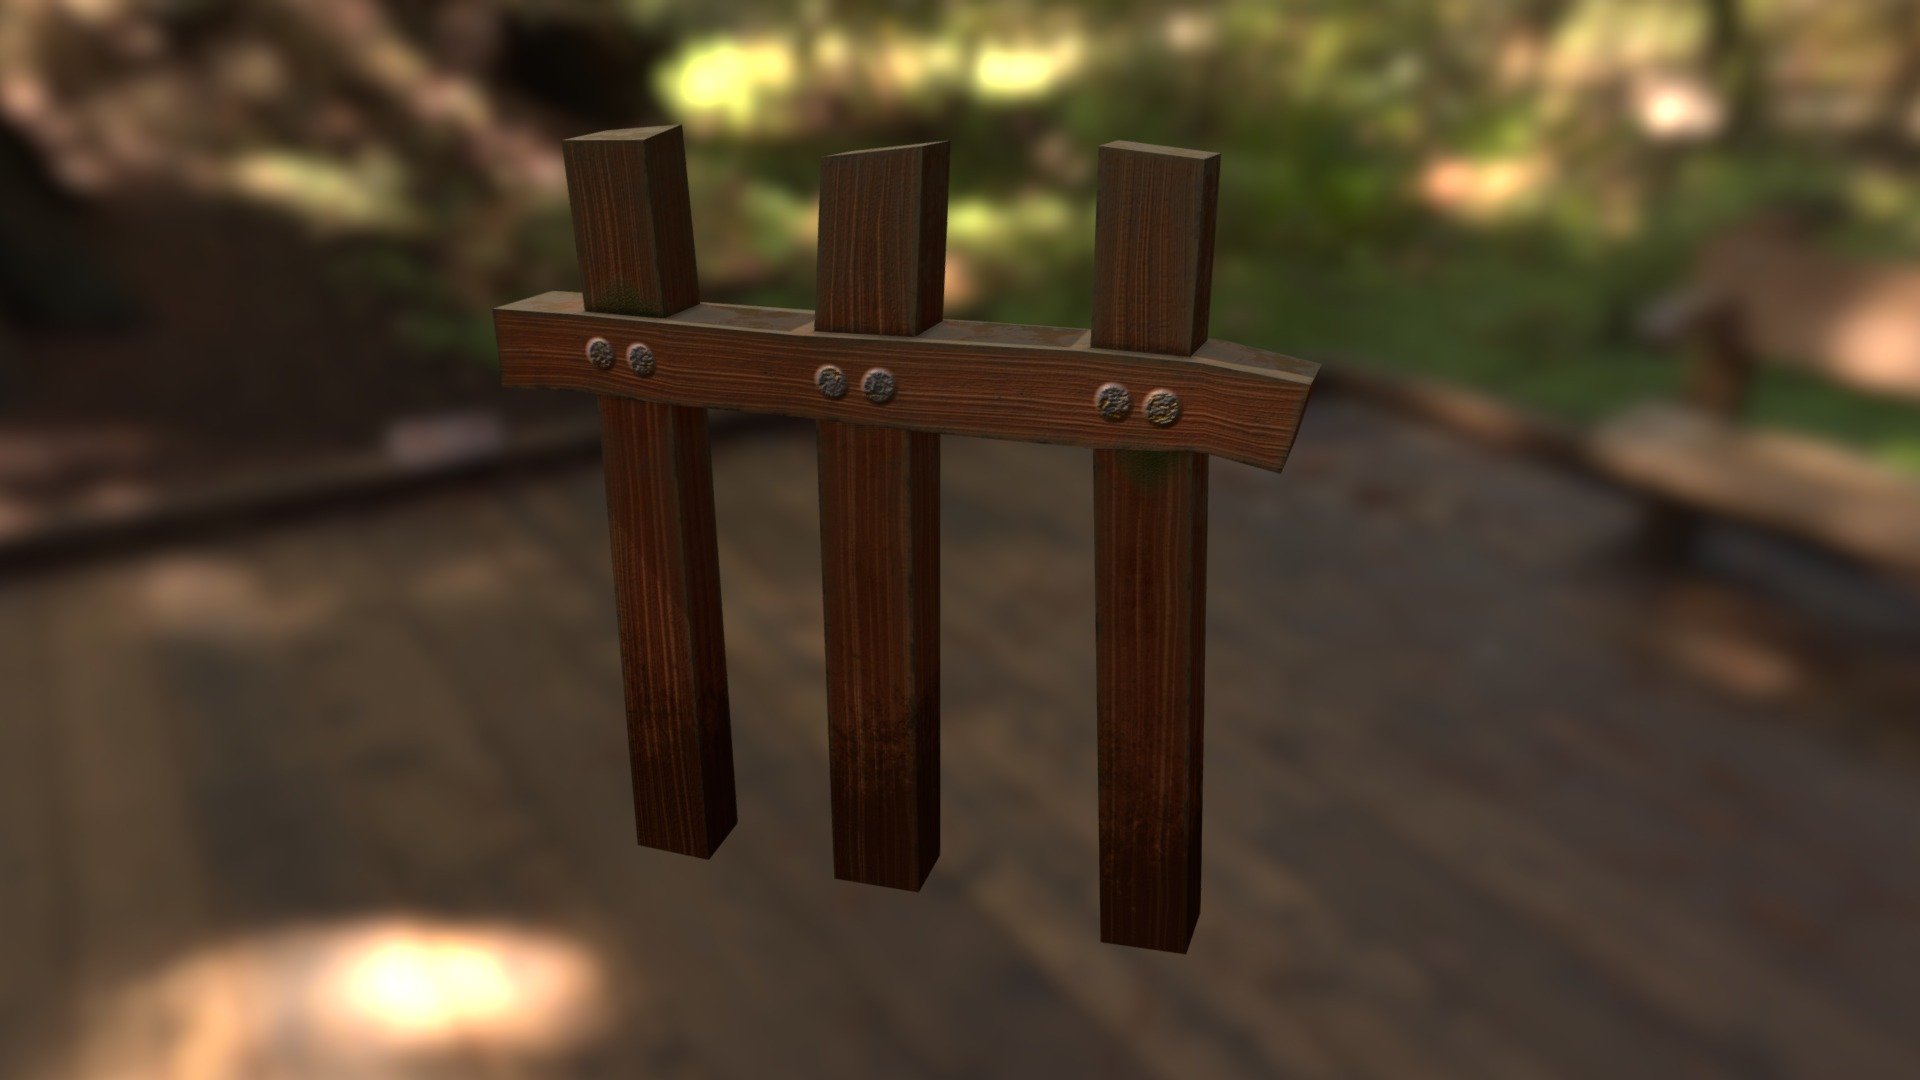 Old Fence - Low Poly